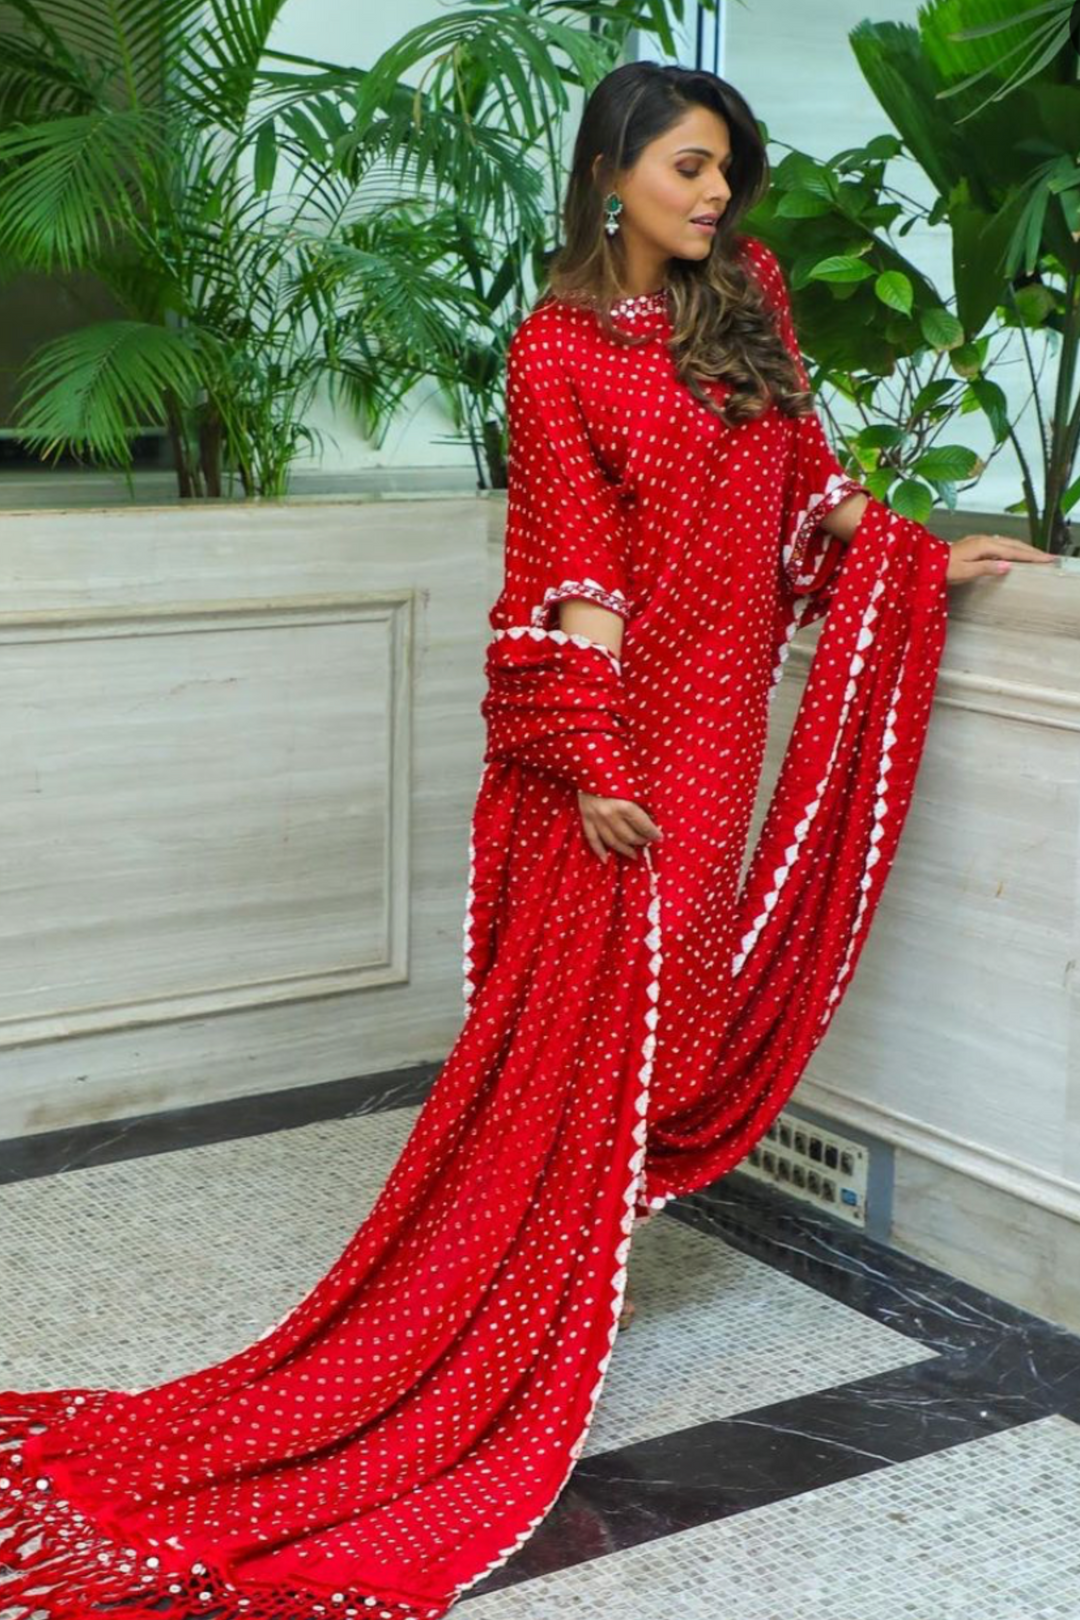 The Image Code in our Boat Neck Saree